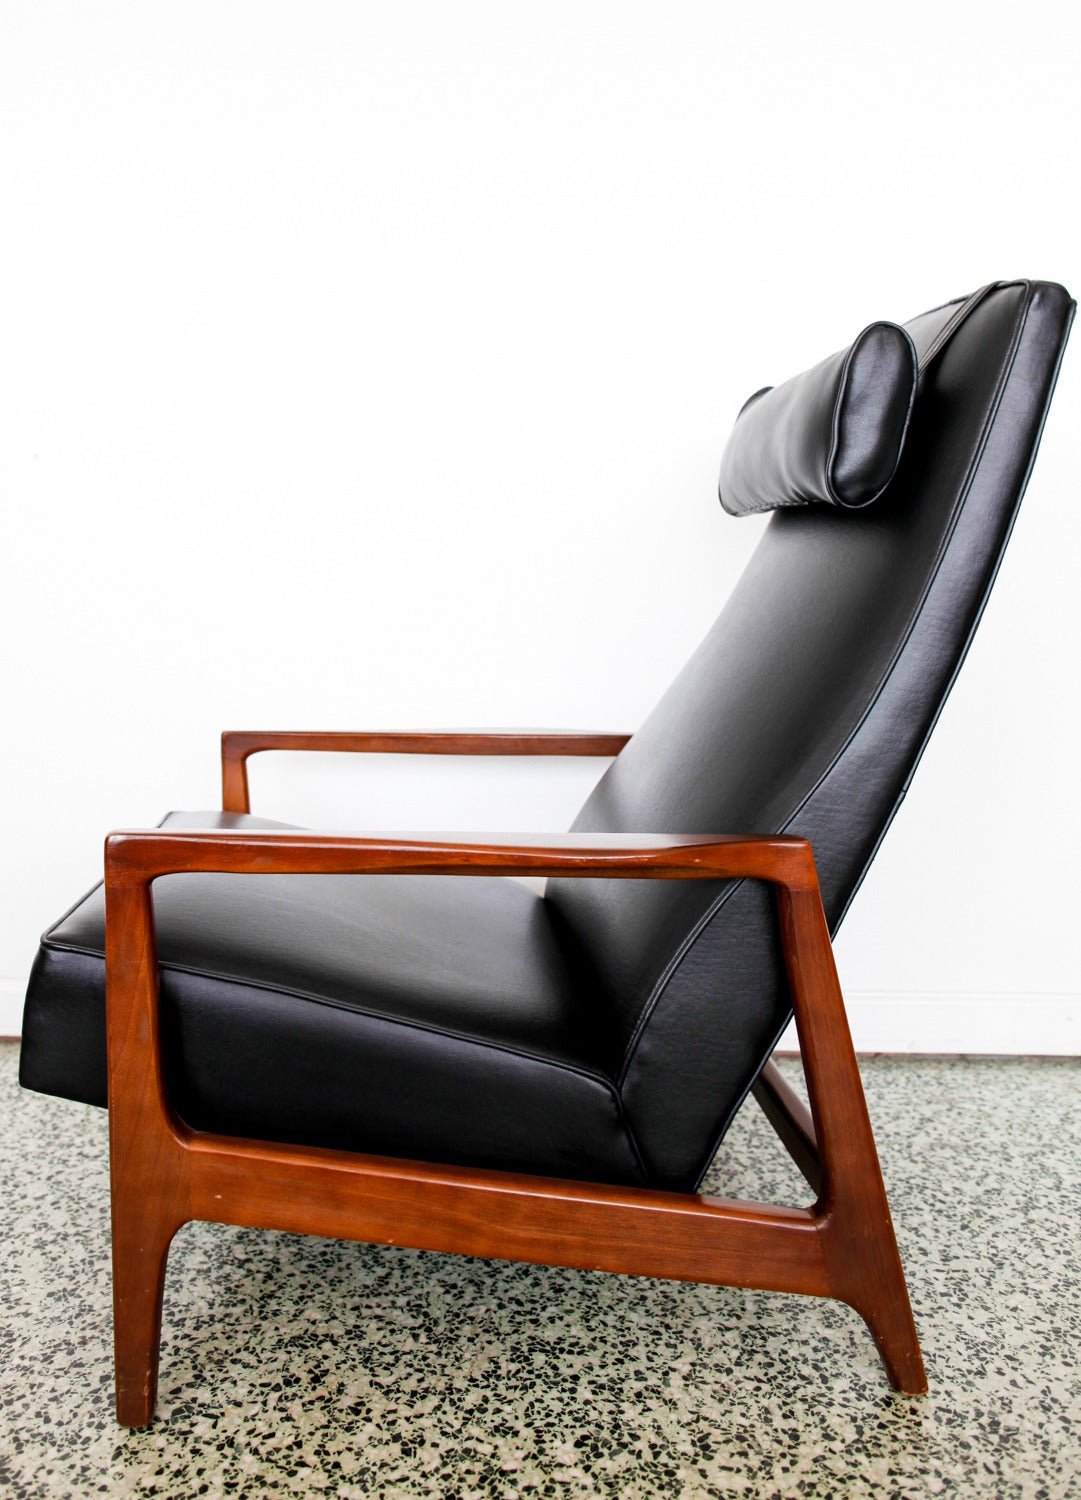 Beautiful fully reclining Danish lounge chair. Removable headrest pillow and pull-out foot rest. Smart, Classic design.